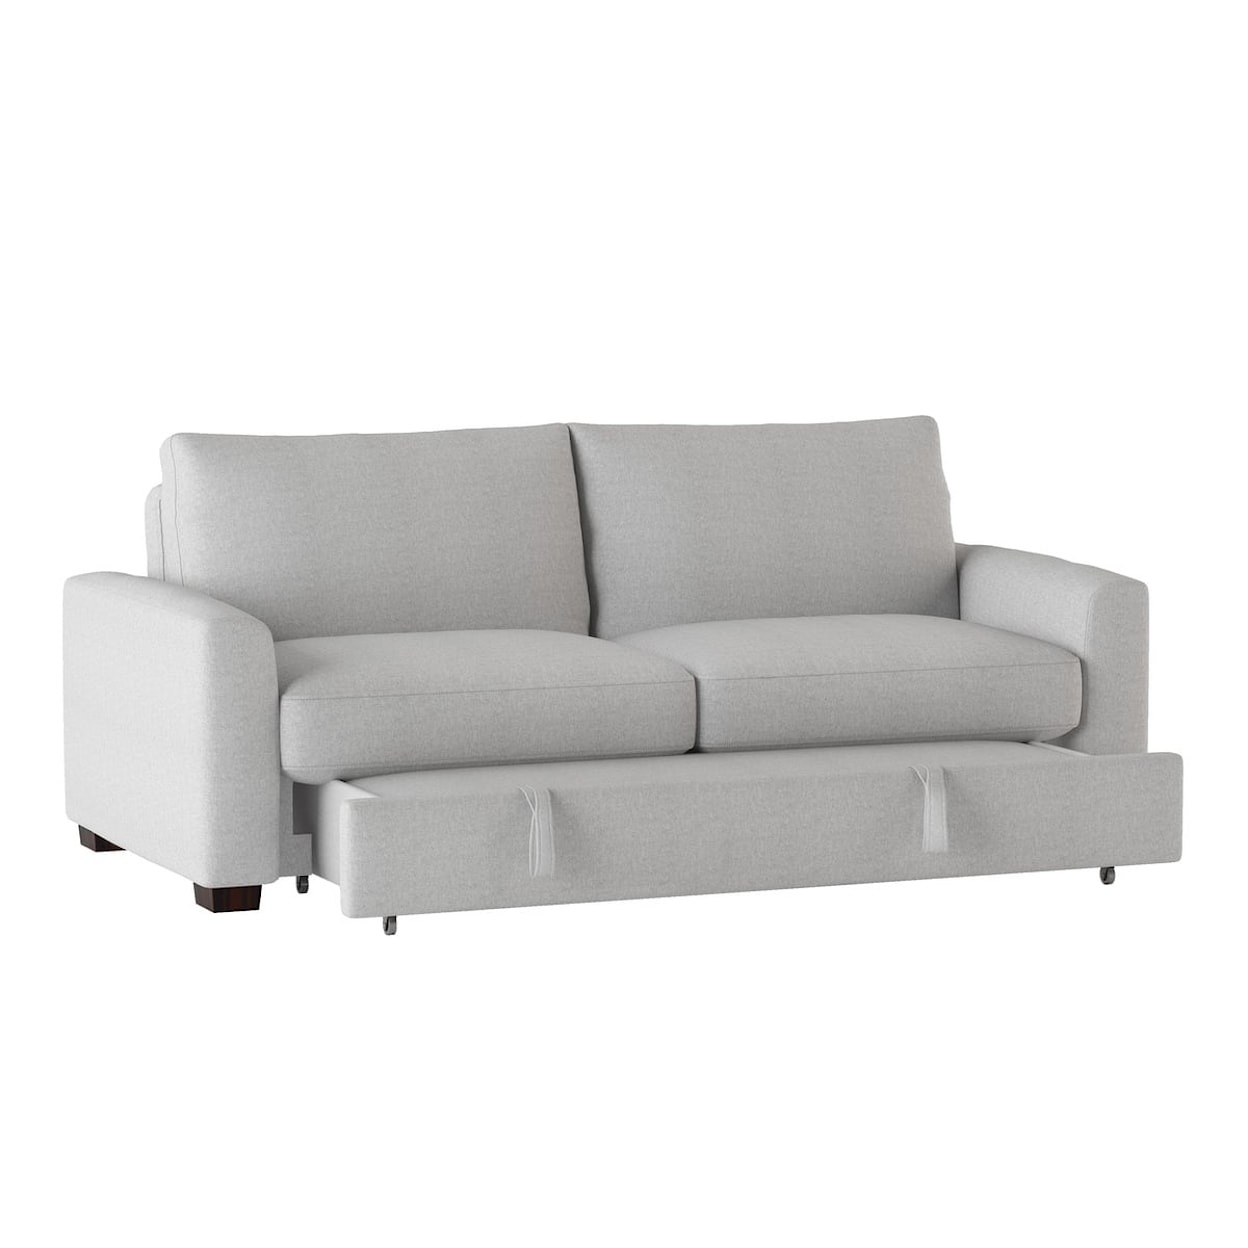 Homelegance Price Convertible Studio Sofa with Pull-out Bed